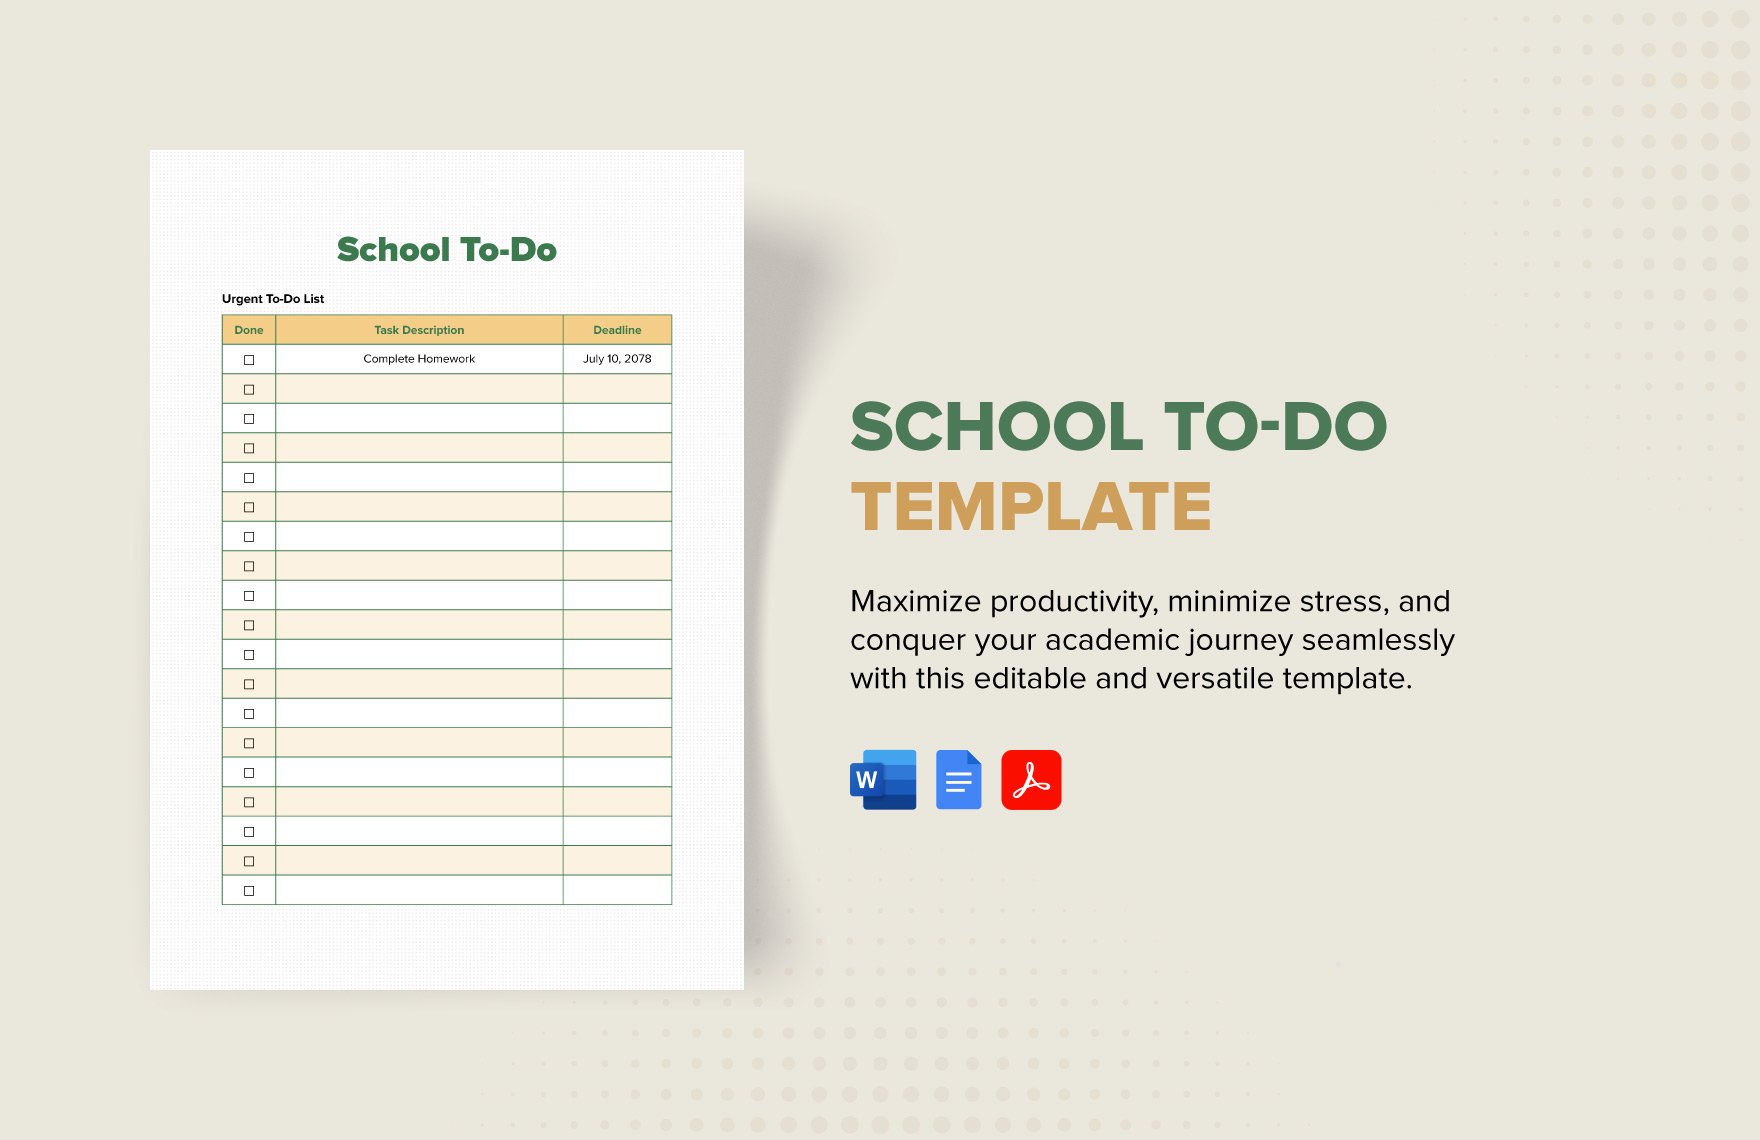 School To-Do Template